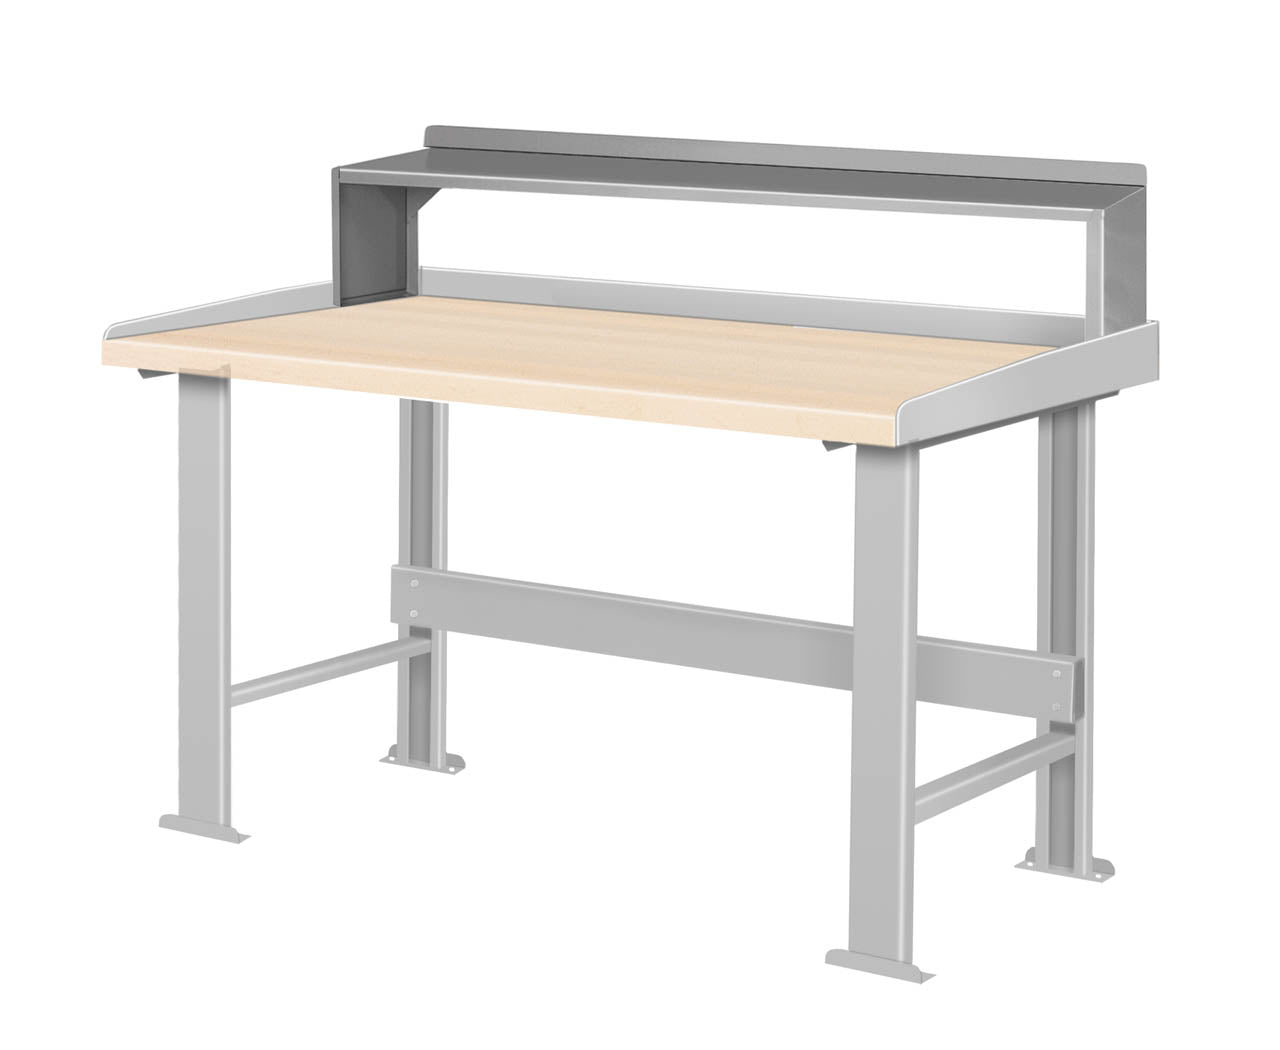 72"W Bench Riser for Pucel Work Benches